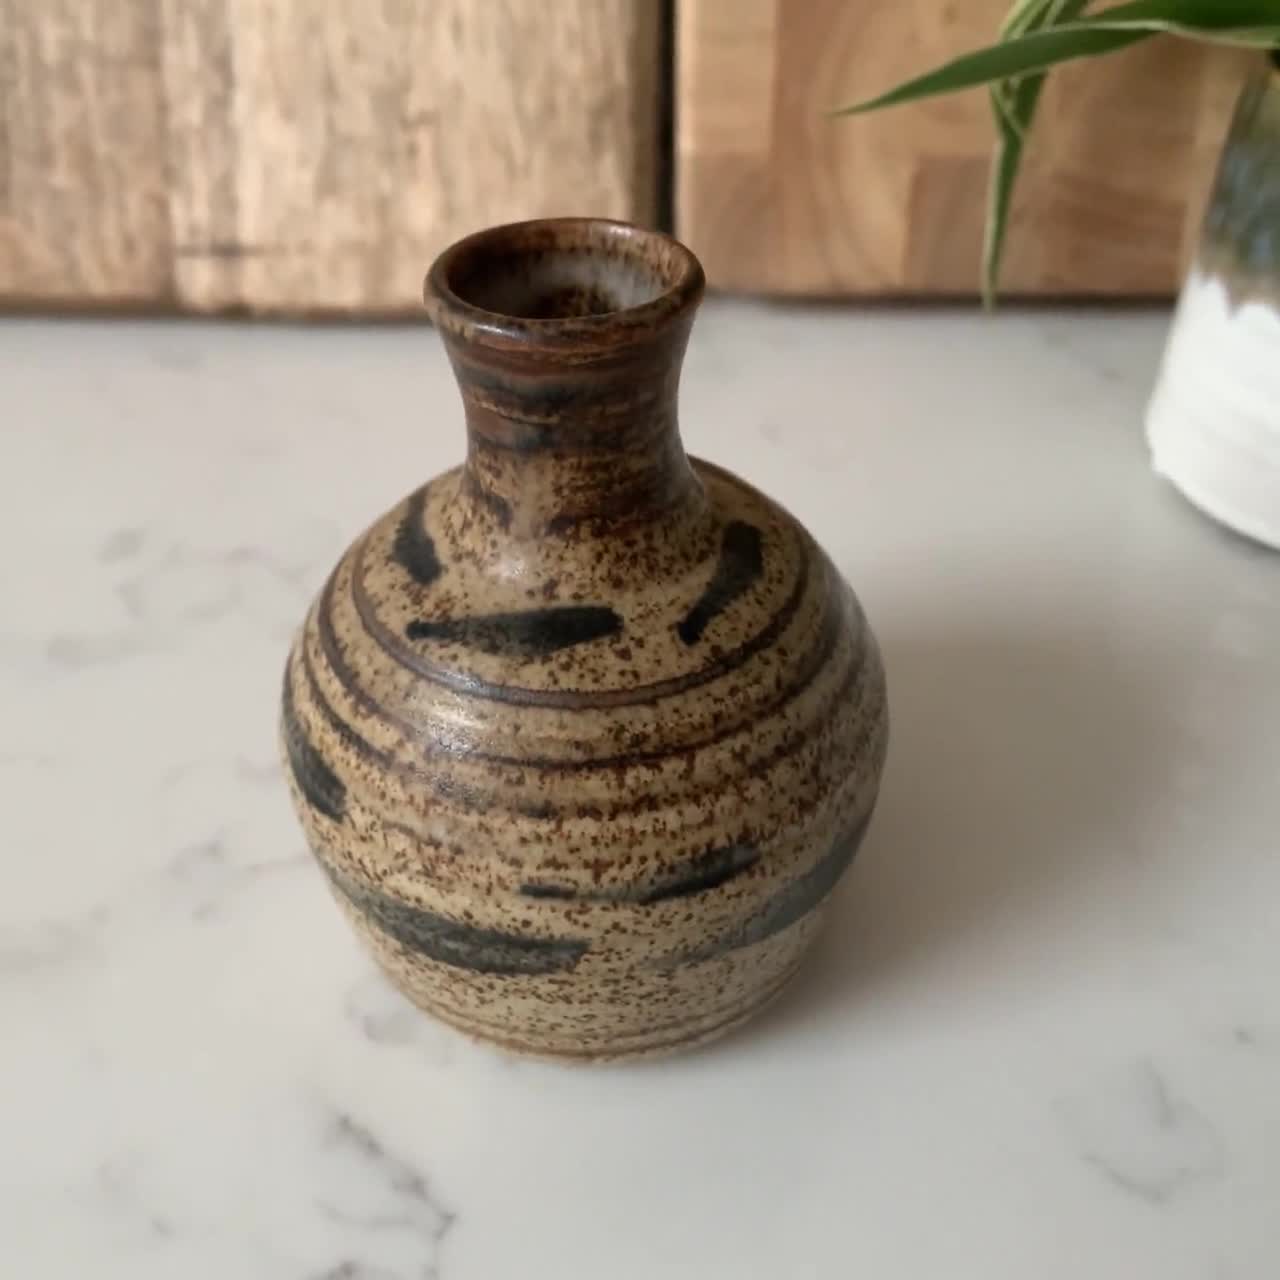 Signed Handmade Early Emmie Philps Studio Pottery Bud Vase c1960s Small Brown Mid-Century Art Pottery Vase